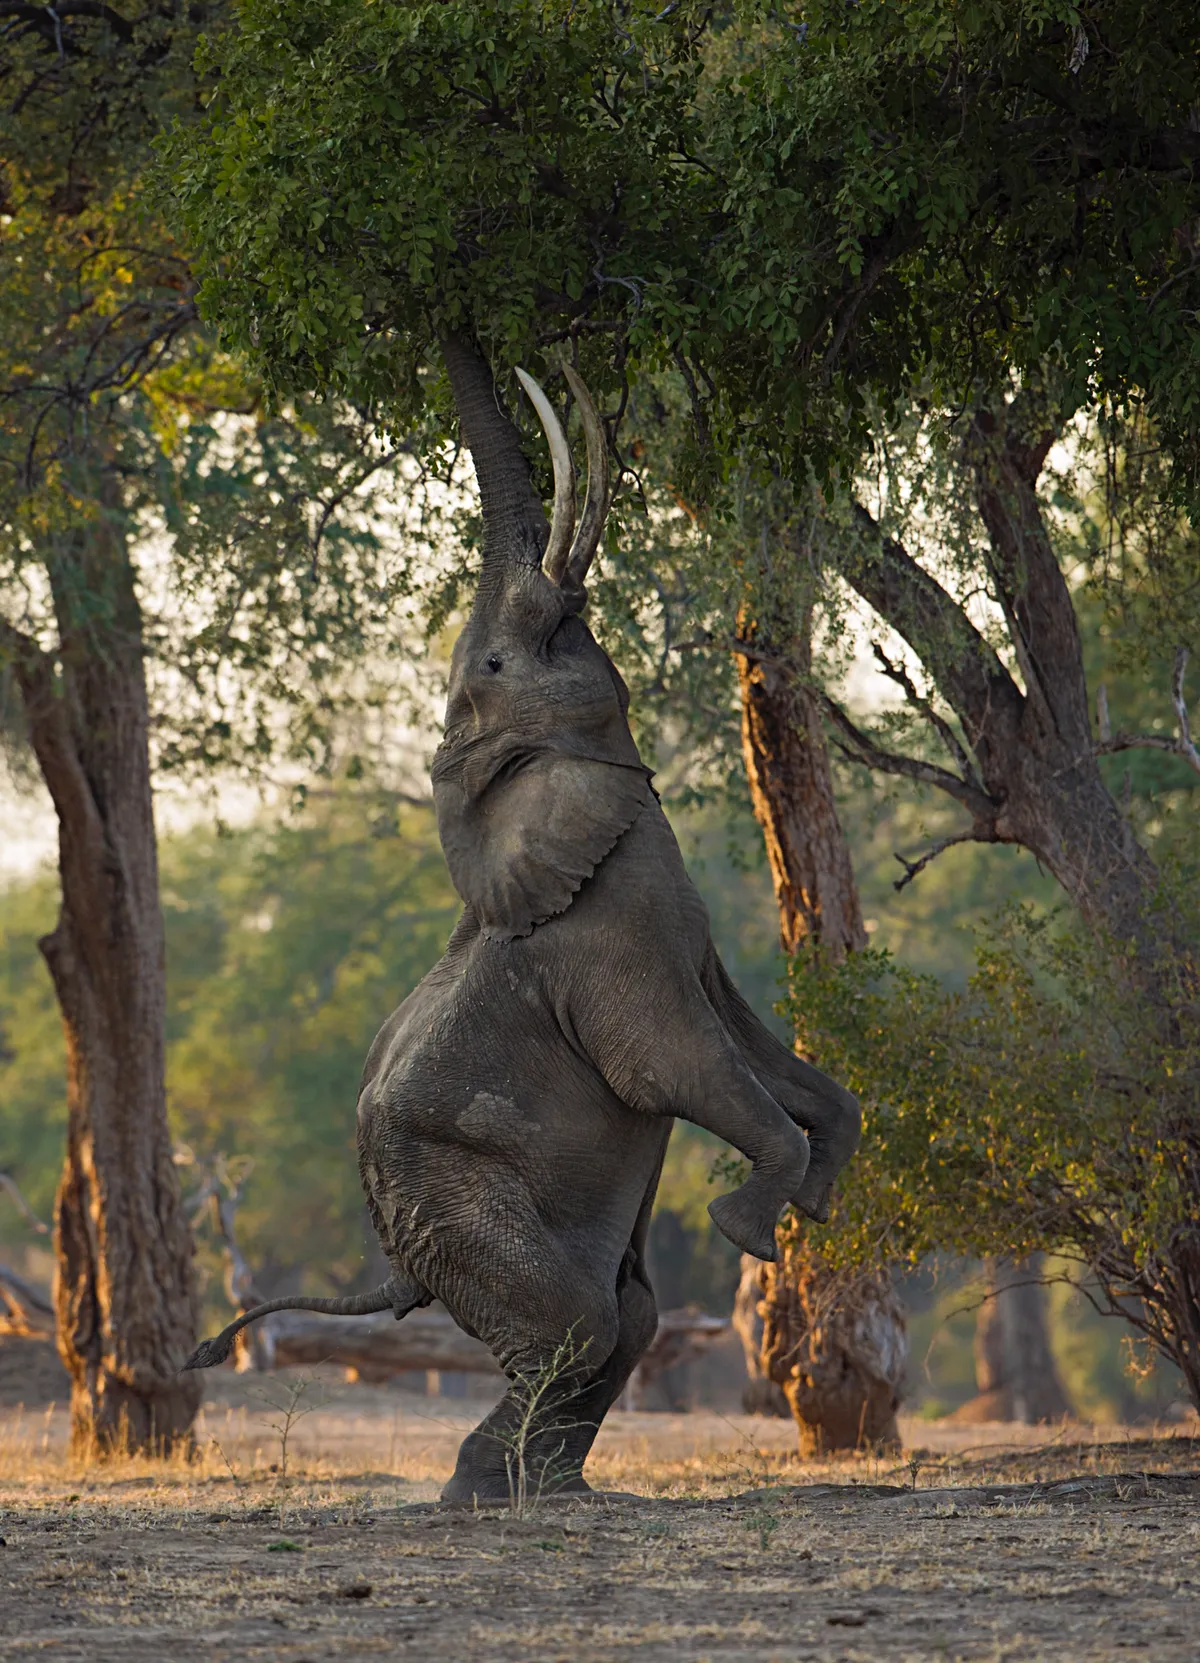 An elephant balances on hind legs, with his head back slightly and trunk stretched up high, to eat leaves from an overhanging tree.